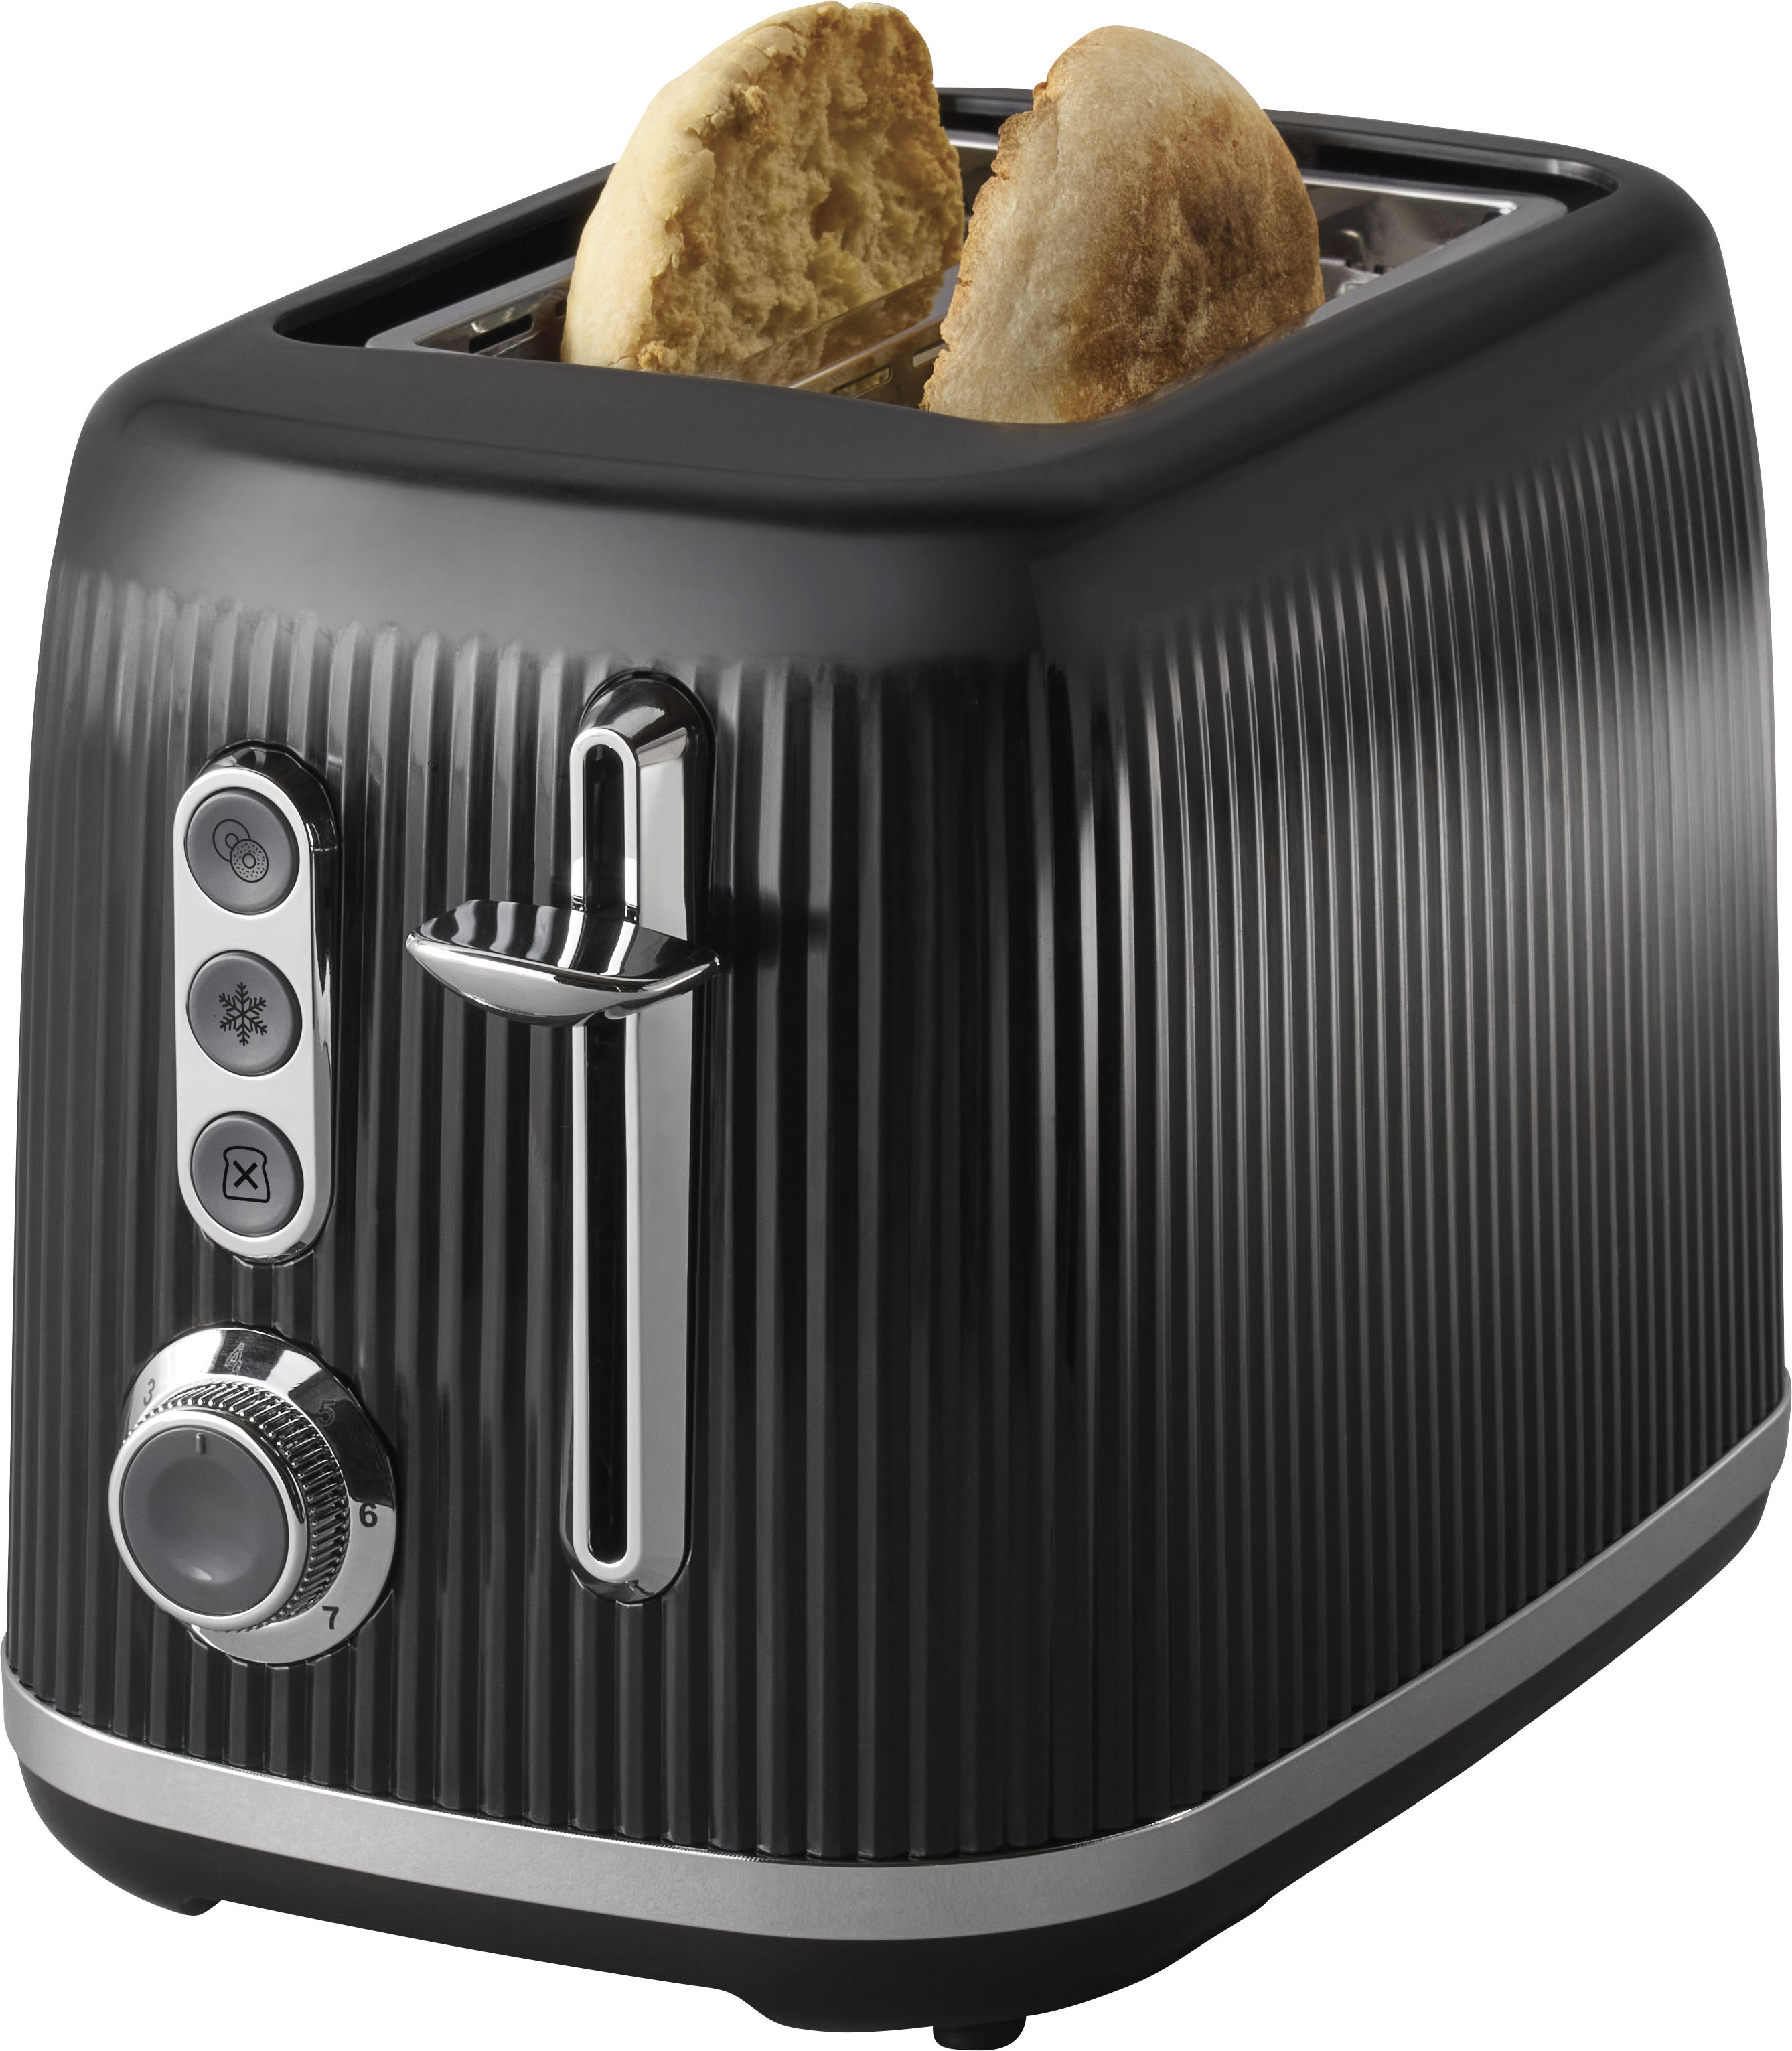  Oster 2-Slice Toaster with Advanced Toast Technology